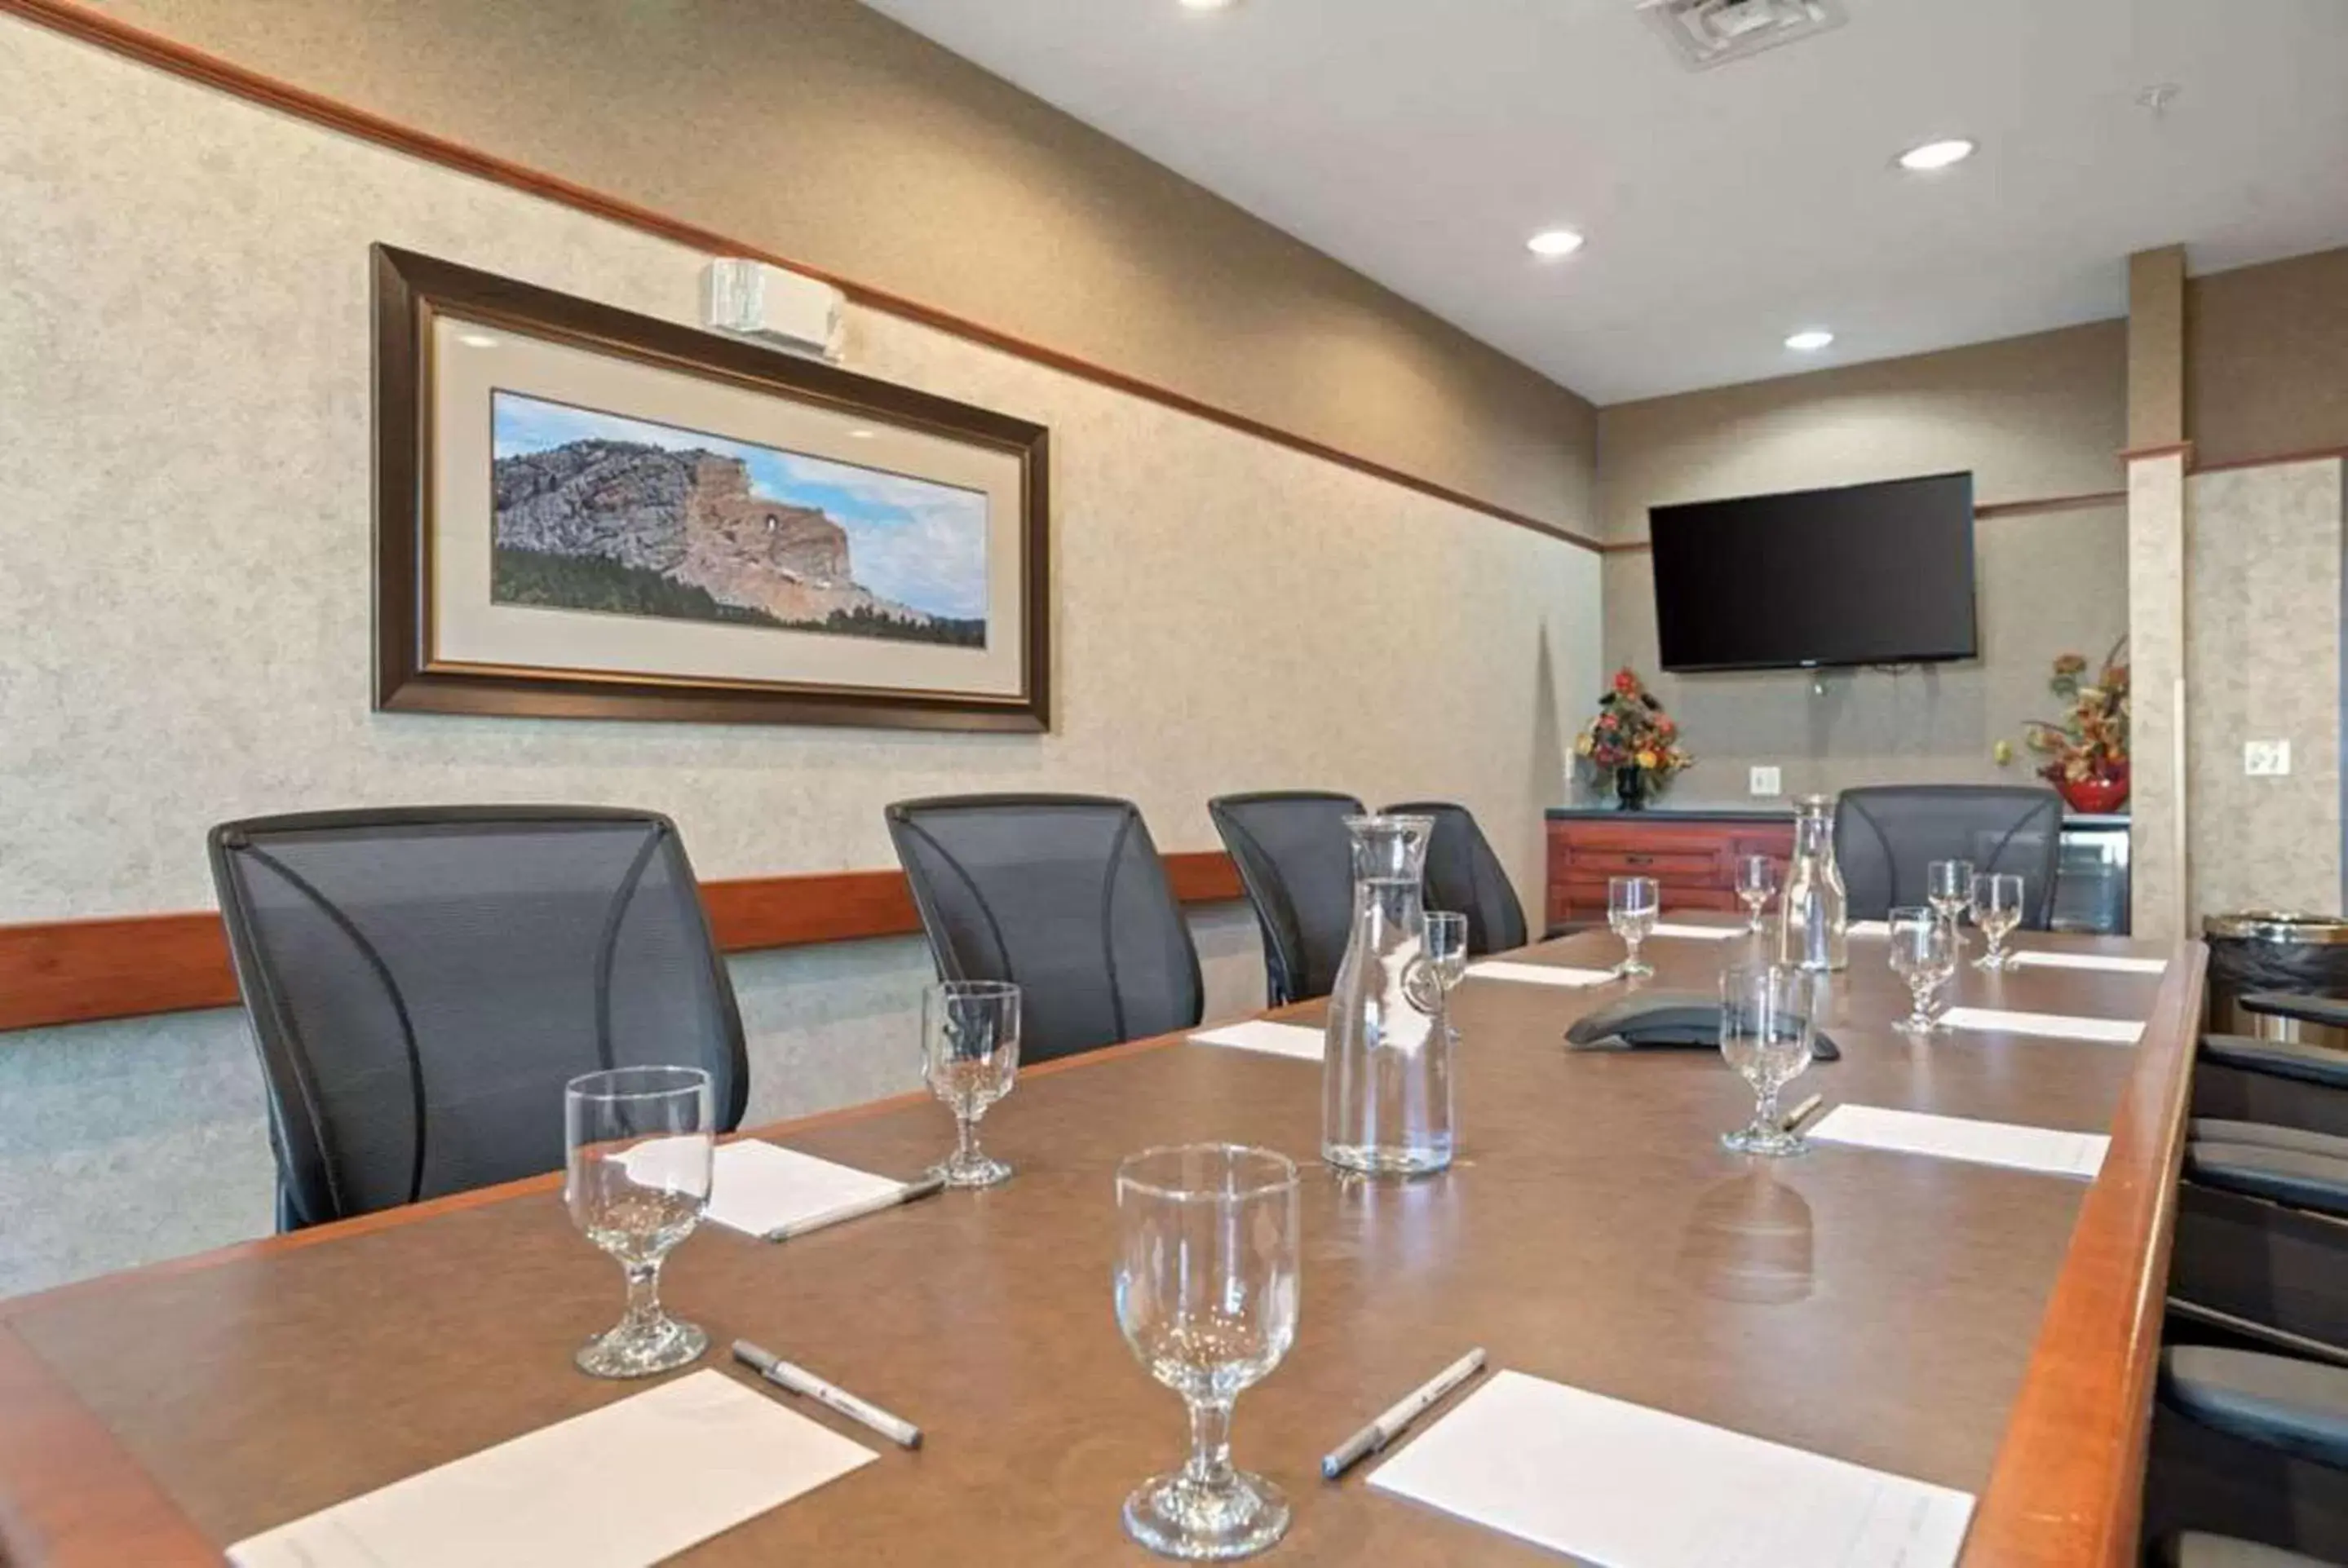 Meeting/conference room, Business Area/Conference Room in Comfort Inn & Suites Rapid City near Mt Rushmore